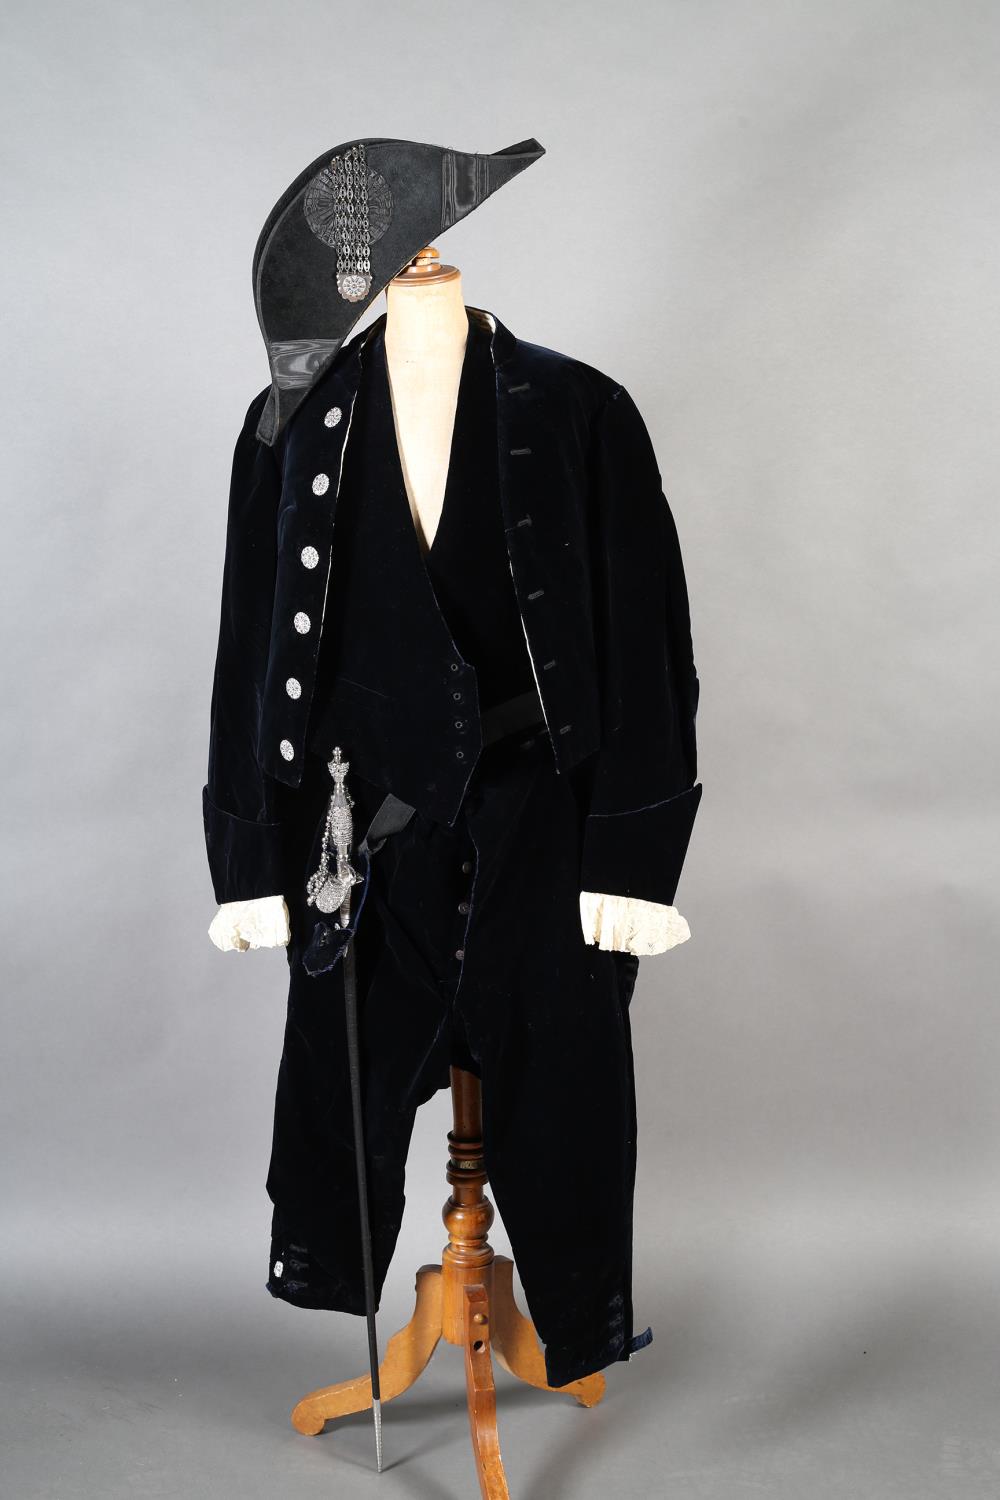 A court suit of dark blue velvet comprising coat with cream lace cuffs, breeches, waistcoat and